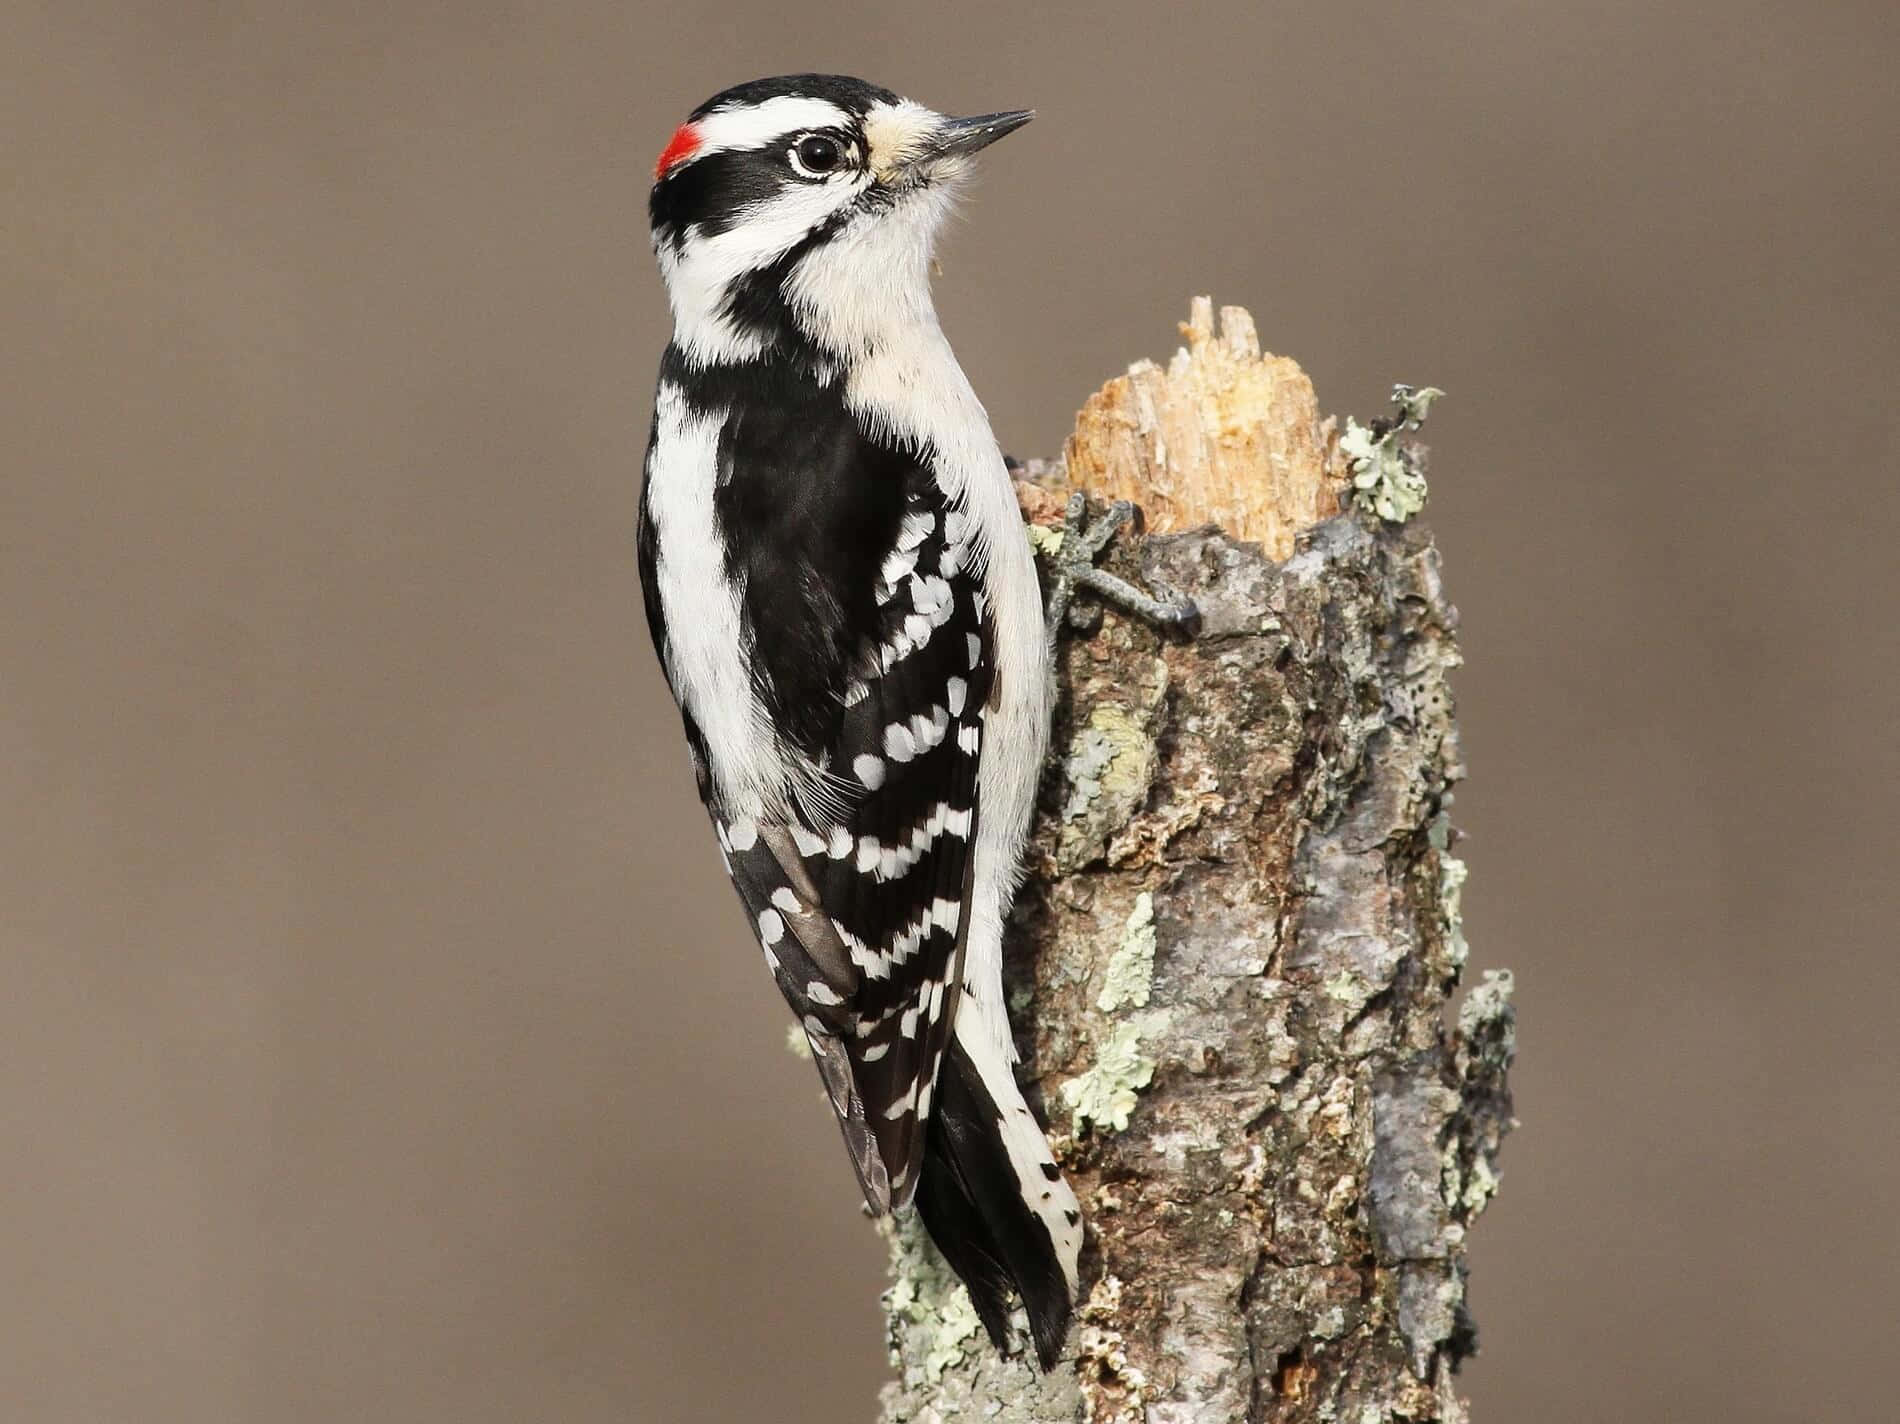 A woodpecker perched on a tree branch.